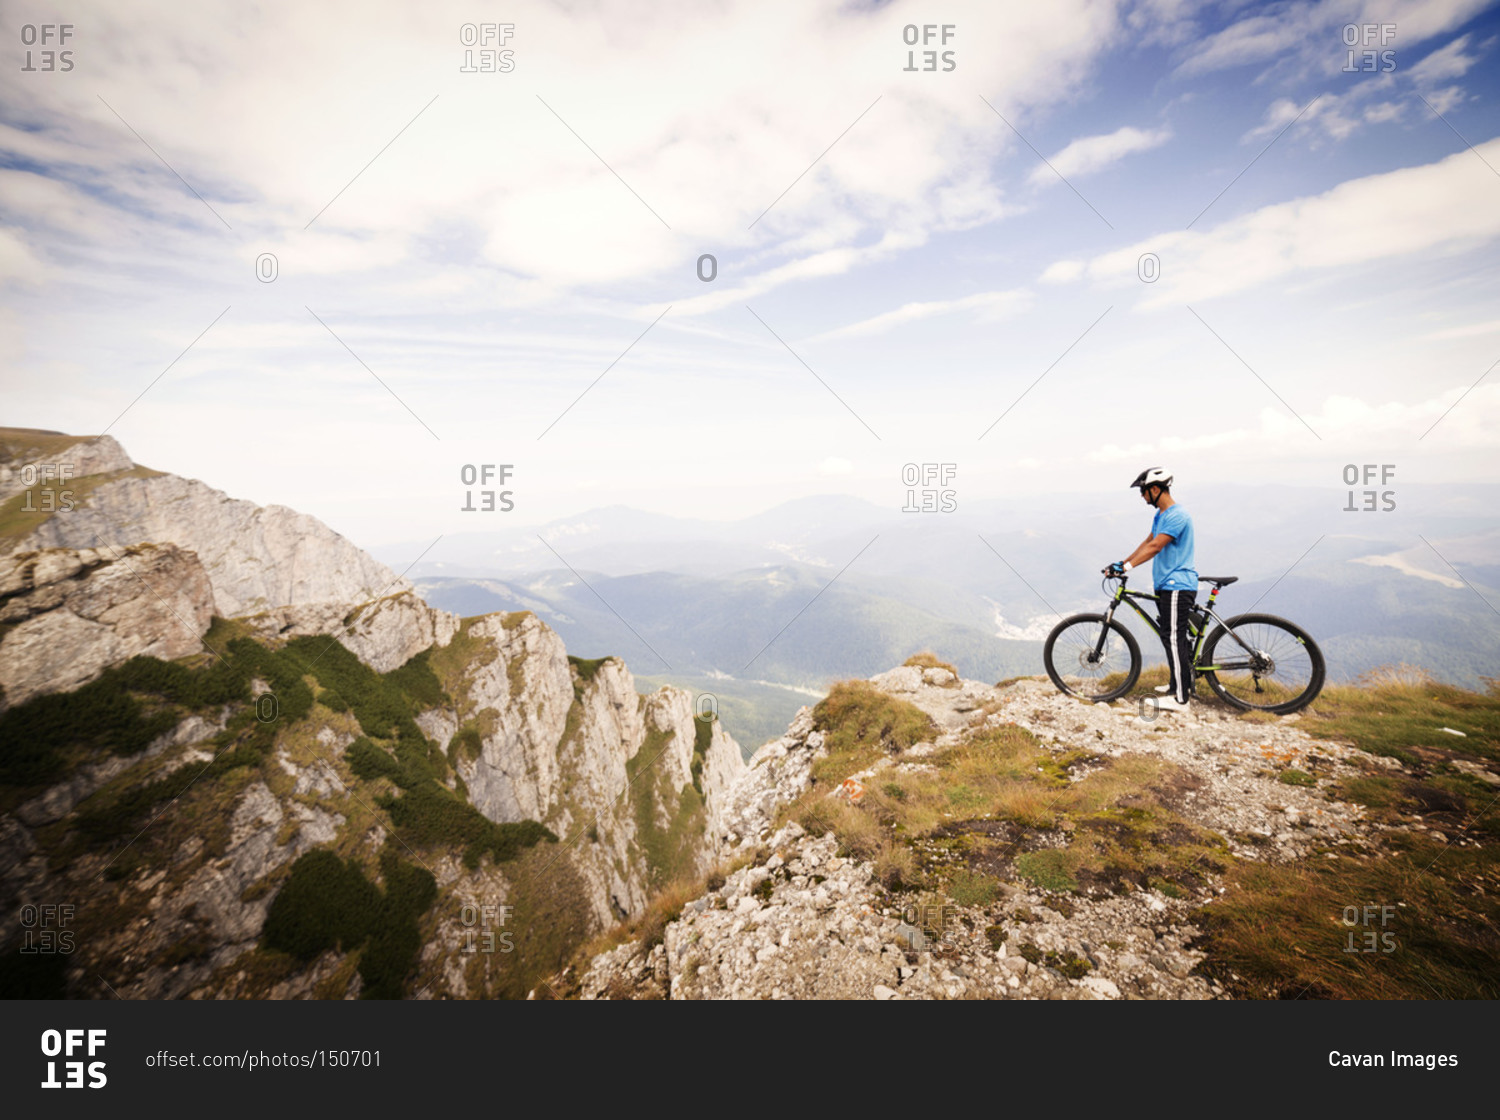 Bicyclist on mountain at scenic overlook, Carpathian Mountains